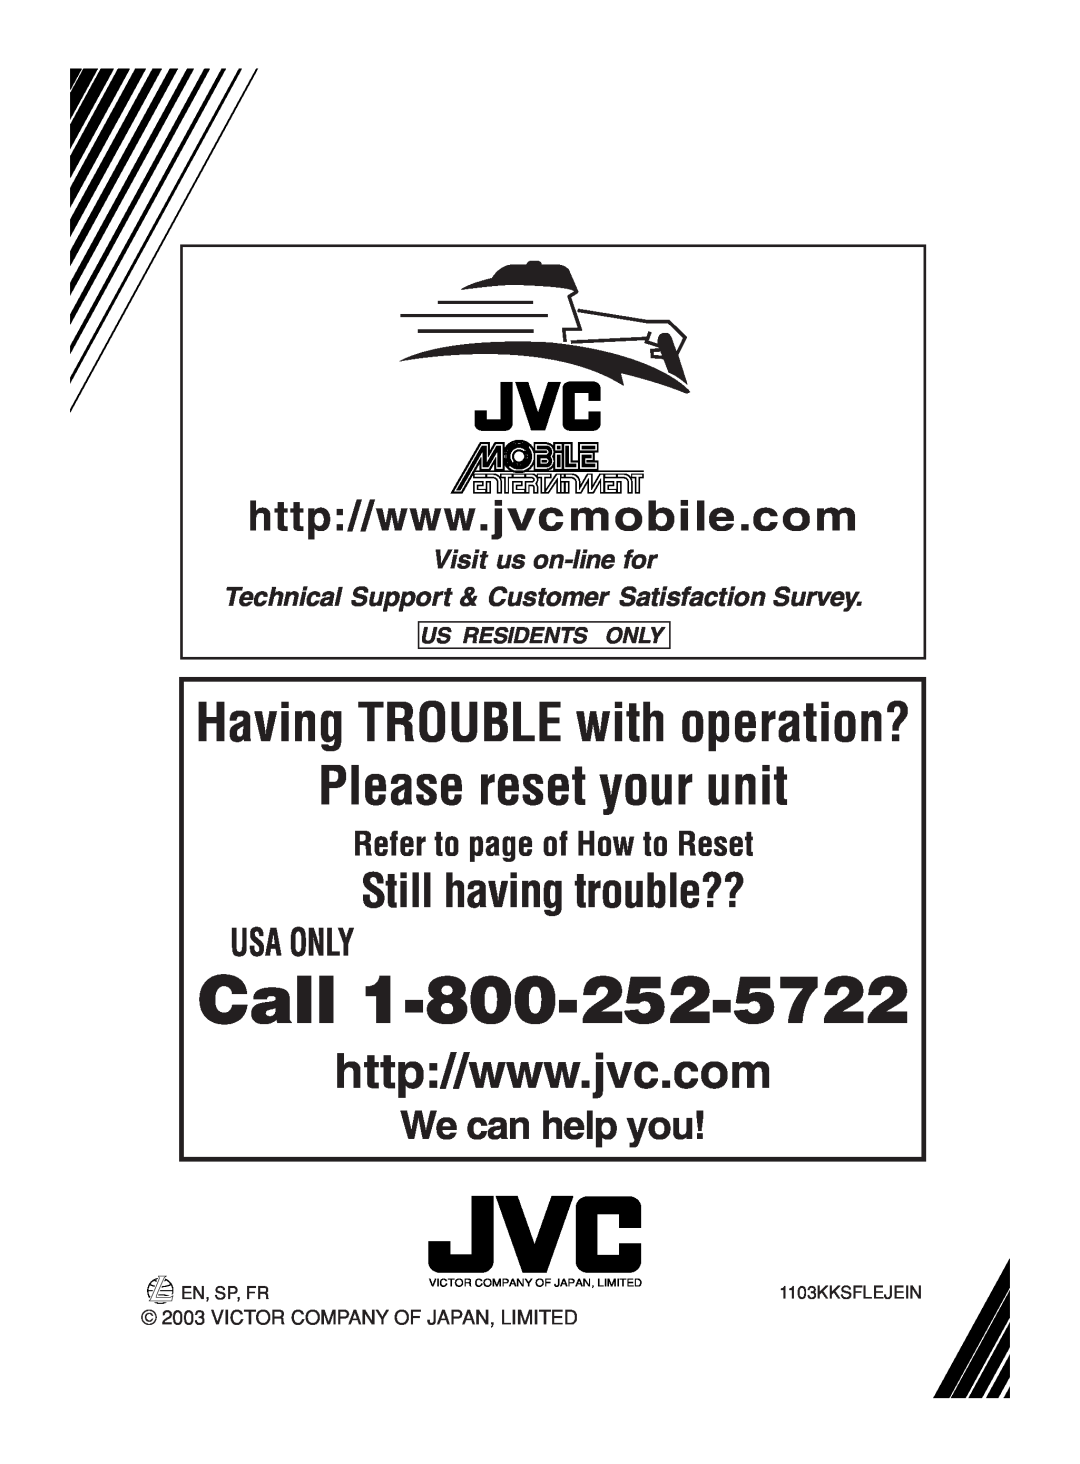 JVC KD-S5050 We can help you, Us Residents Only, Call, Please reset your unit, Having TROUBLE with operation?, Usa Only 